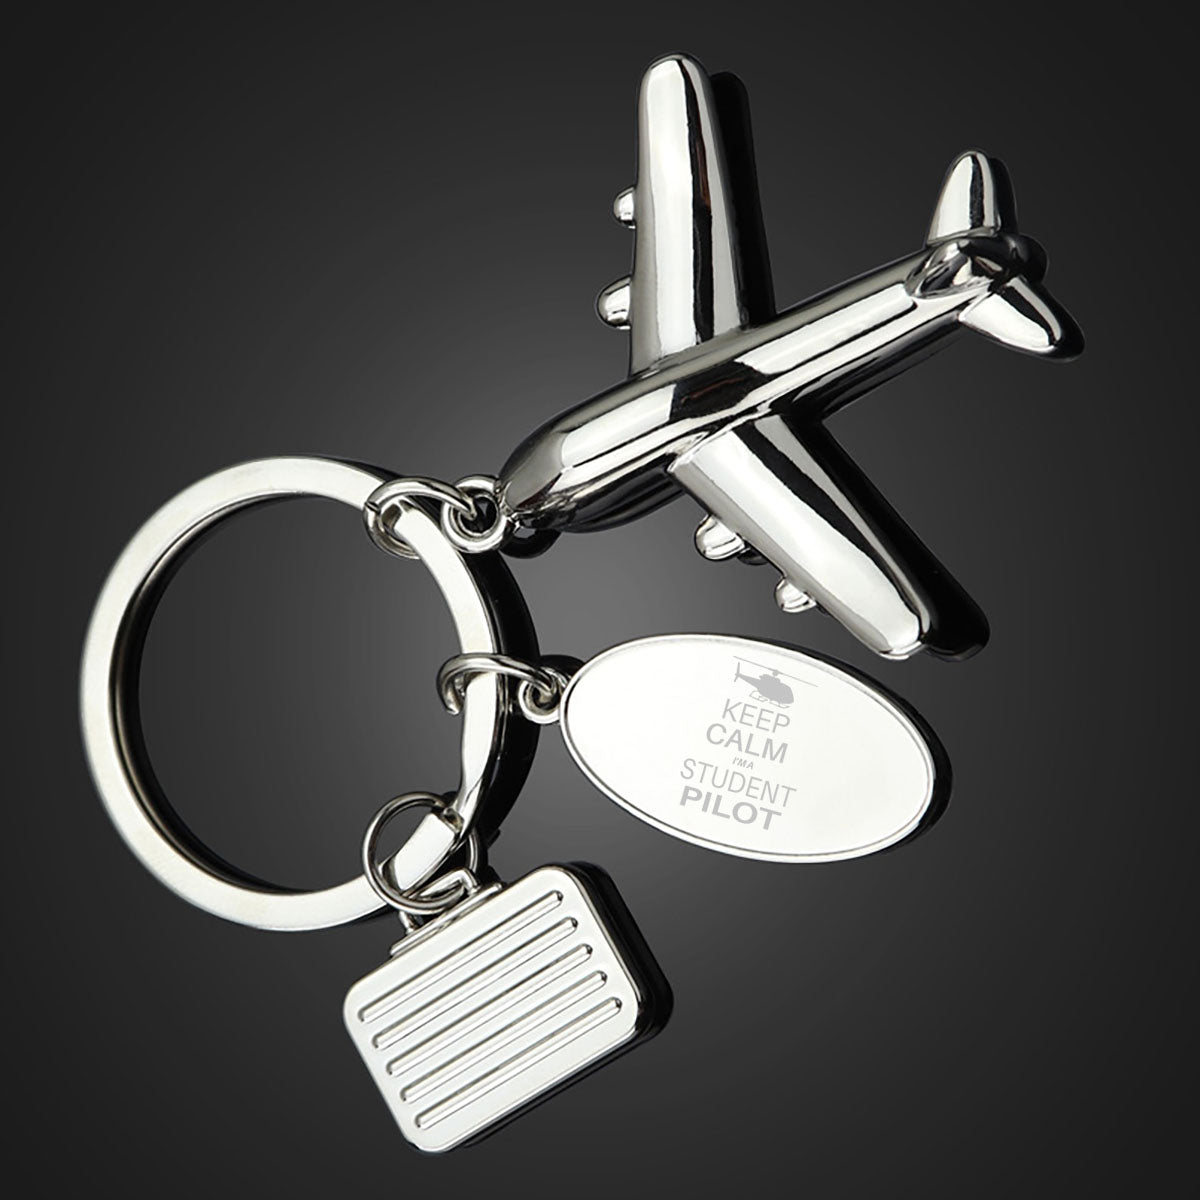 Student Pilot (Helicopter) Designed Suitcase Airplane Key Chains